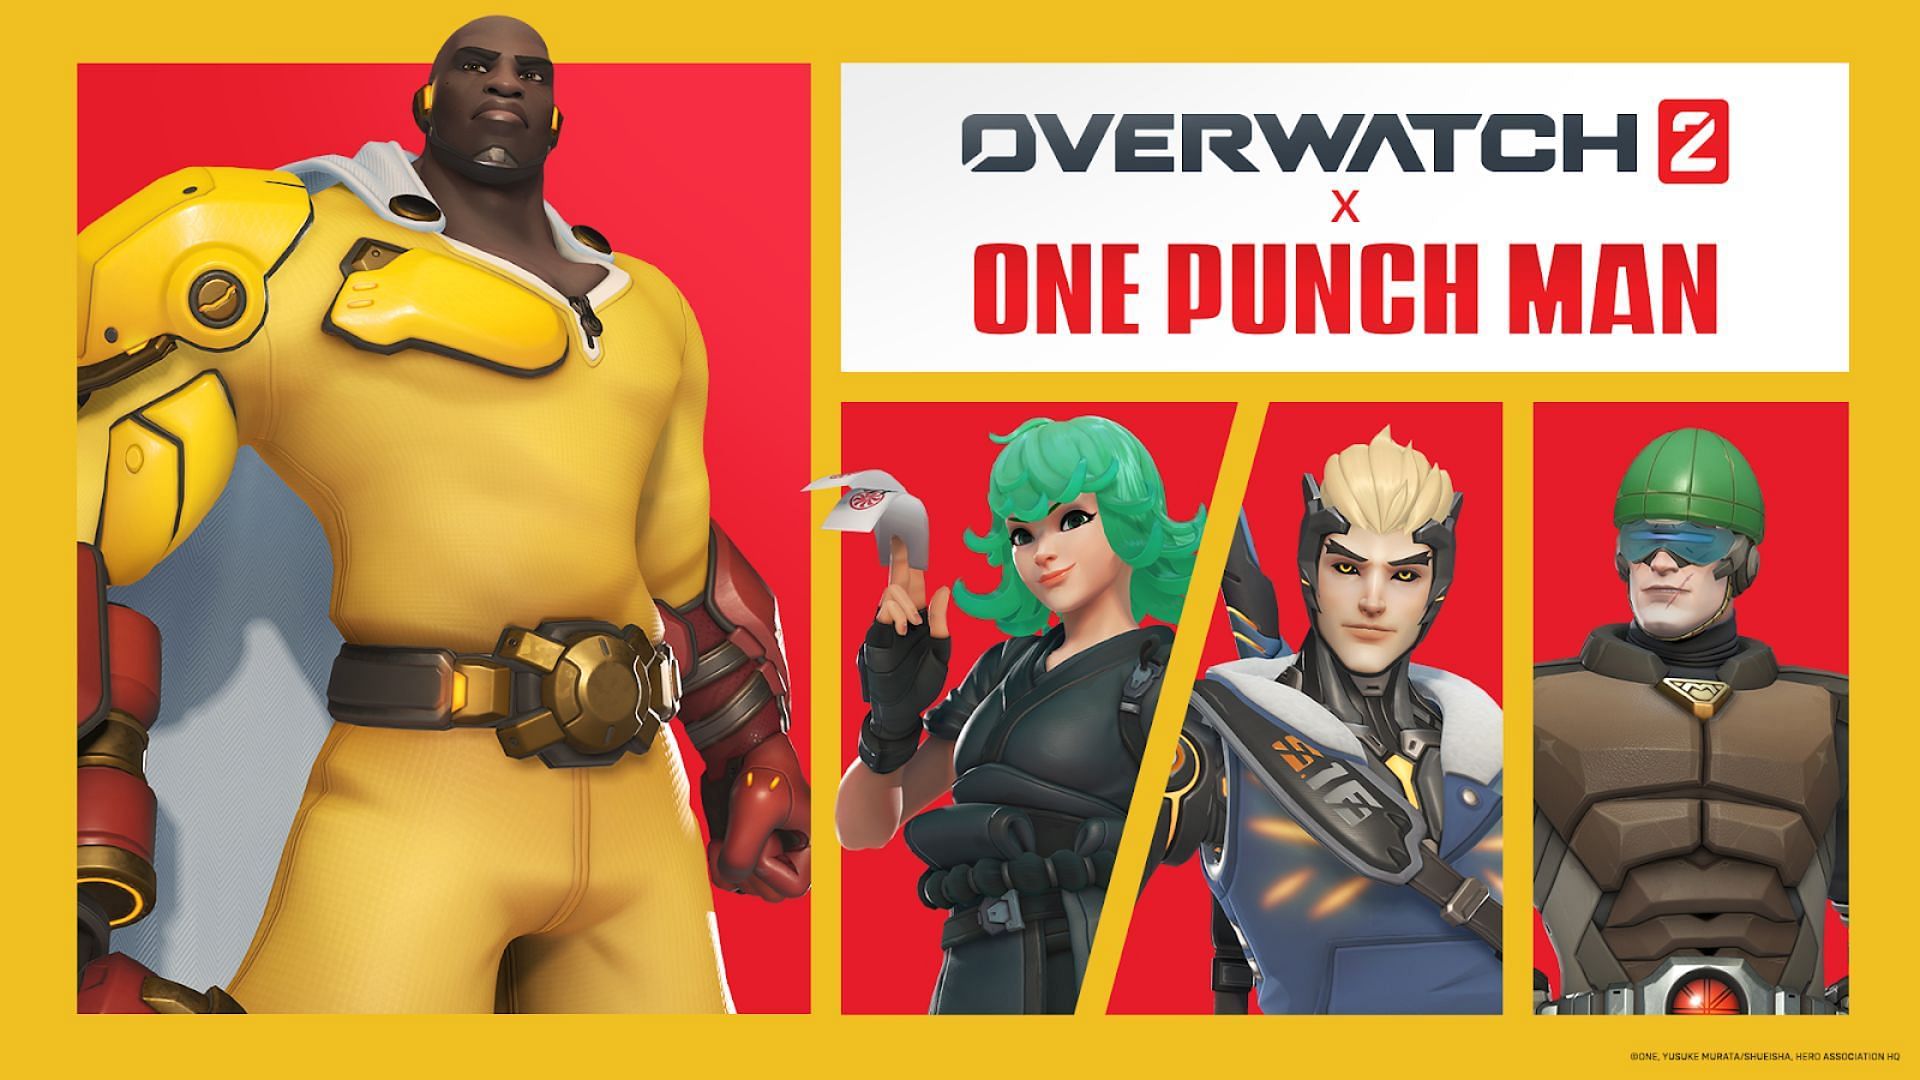 Overwatch 2 x One Punch Man collaboration event: All skins prices,  challenges, rewards, and more